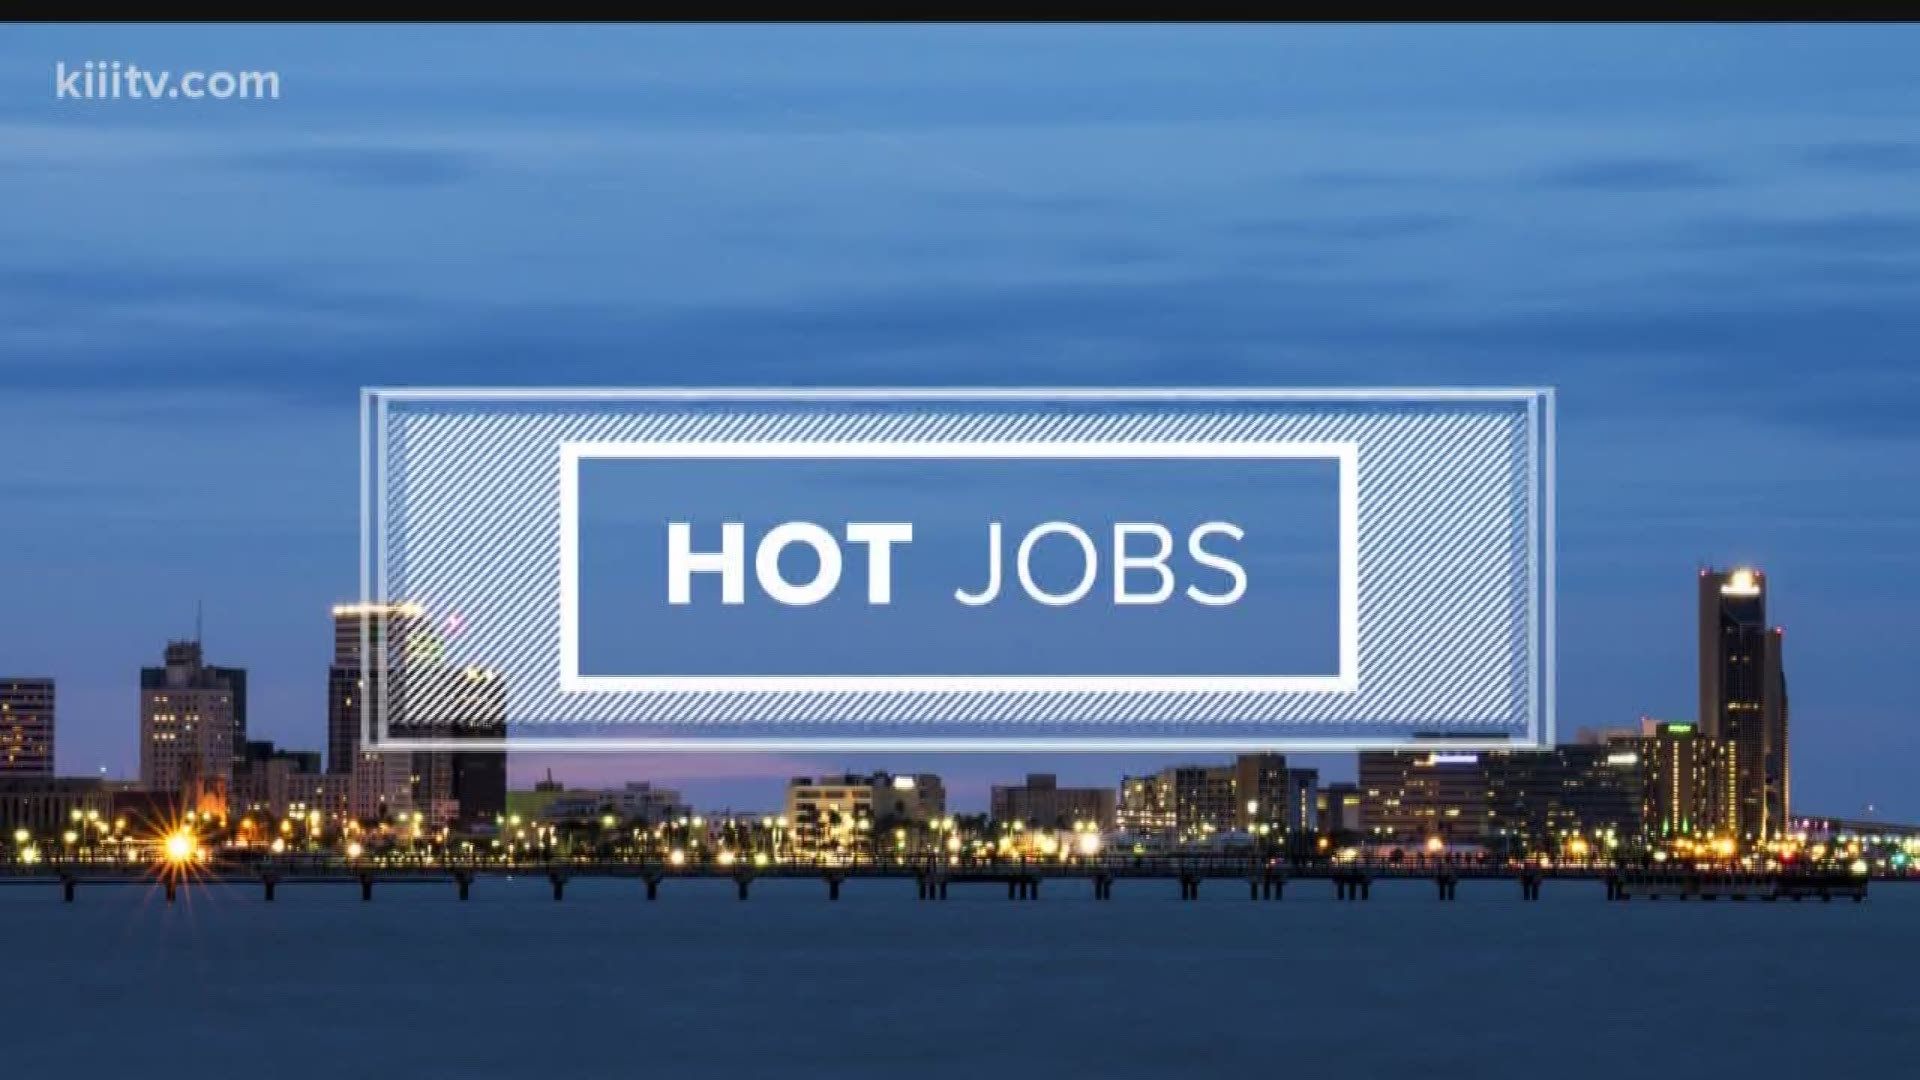 This week's Hot Jobs report is courtesy of Workforce Solutions of the Coastal Bend.